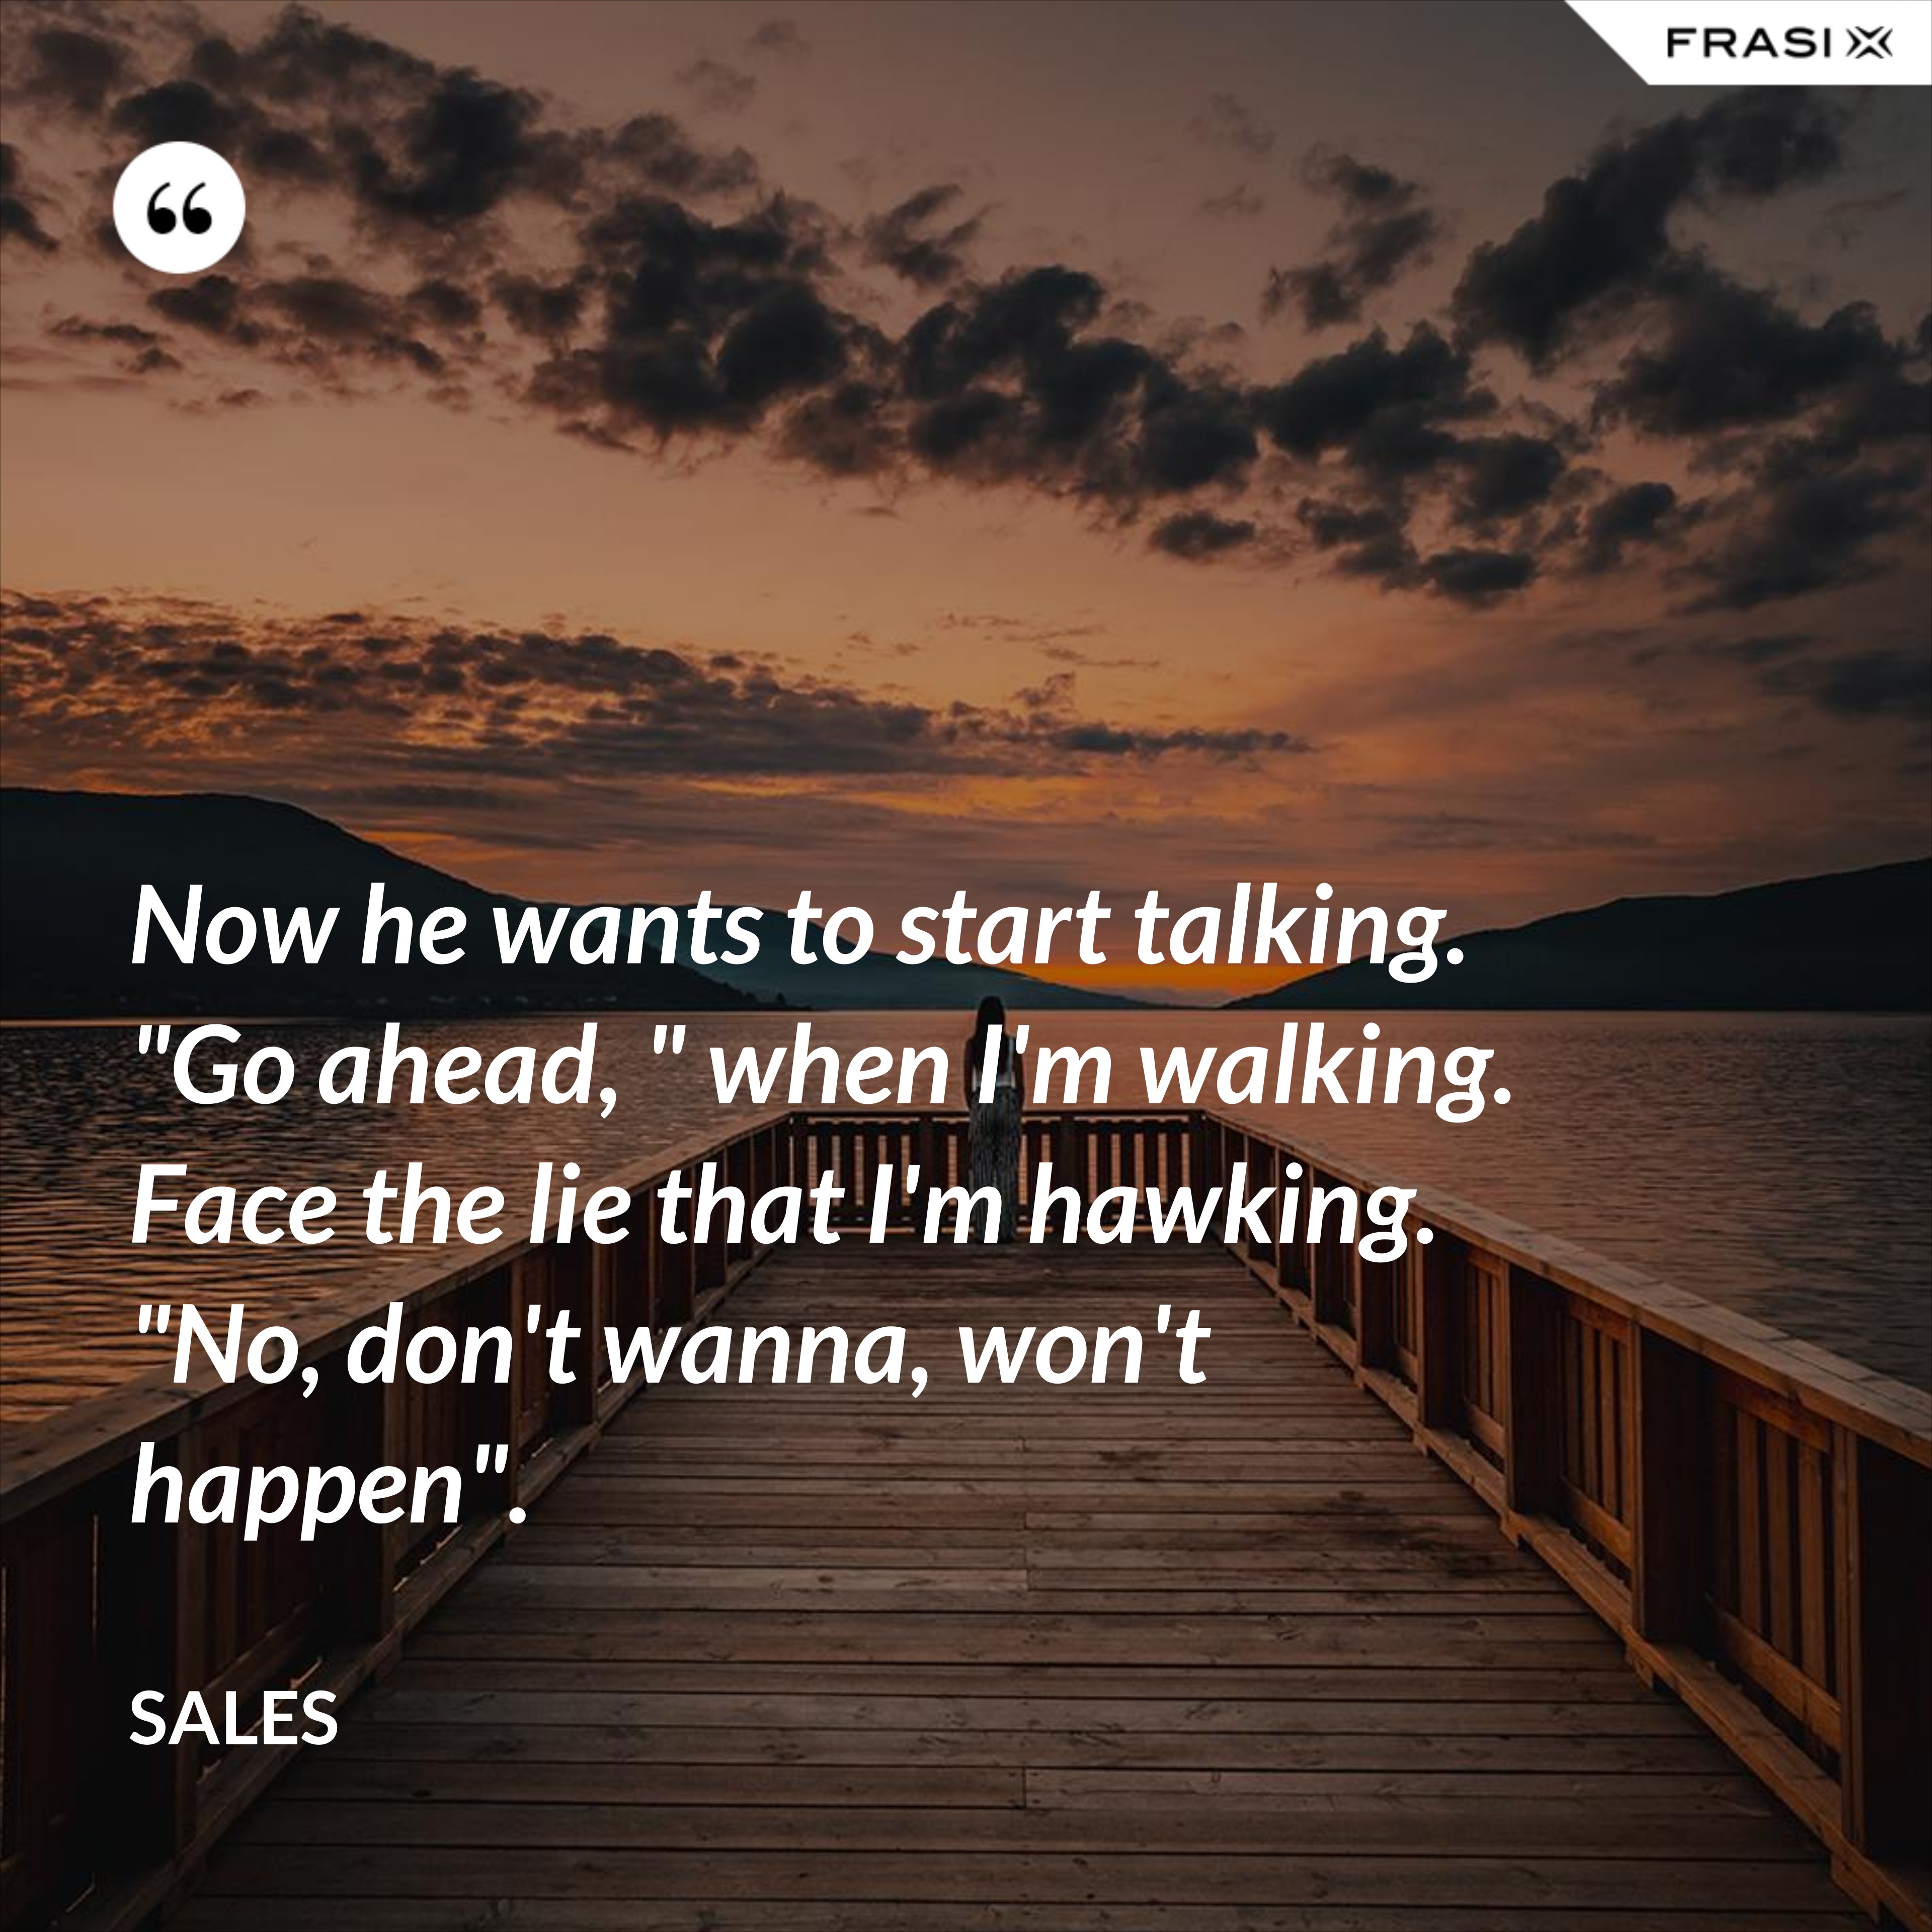 Now he wants to start talking. "Go ahead, " when I'm walking. Face the lie that I'm hawking. "No, don't wanna, won't happen". - Sales